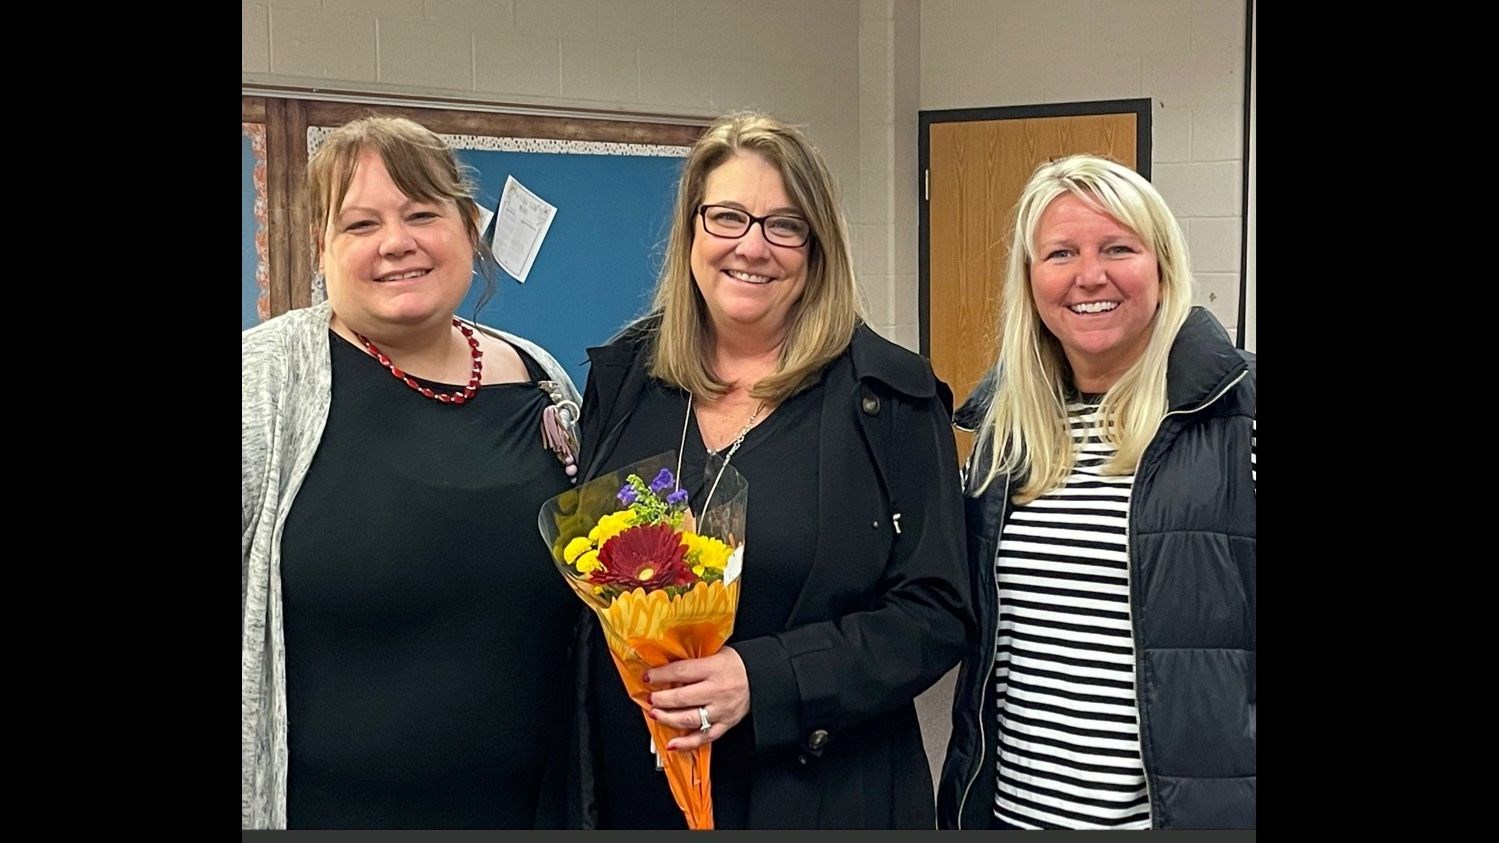 Stephanie Clatterbaugh (middle) learns that she is Georgia's Gifted Program Teacher of the Year.